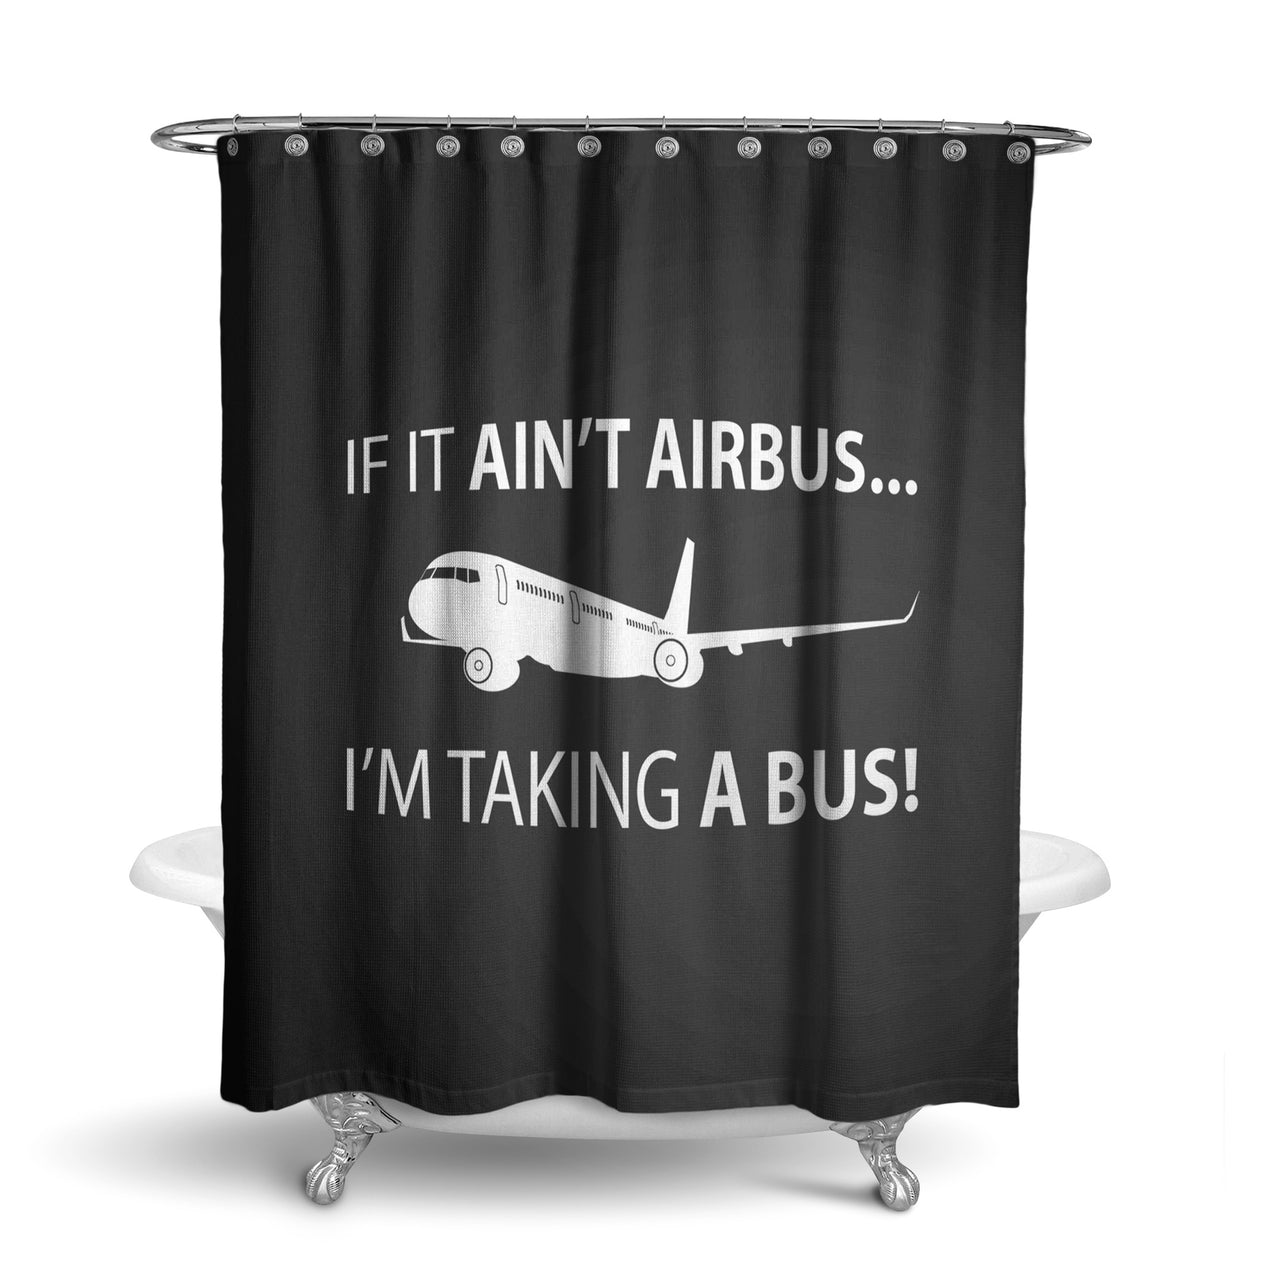 If It Ain't Airbus I'm Taking A Bus Designed Shower Curtains